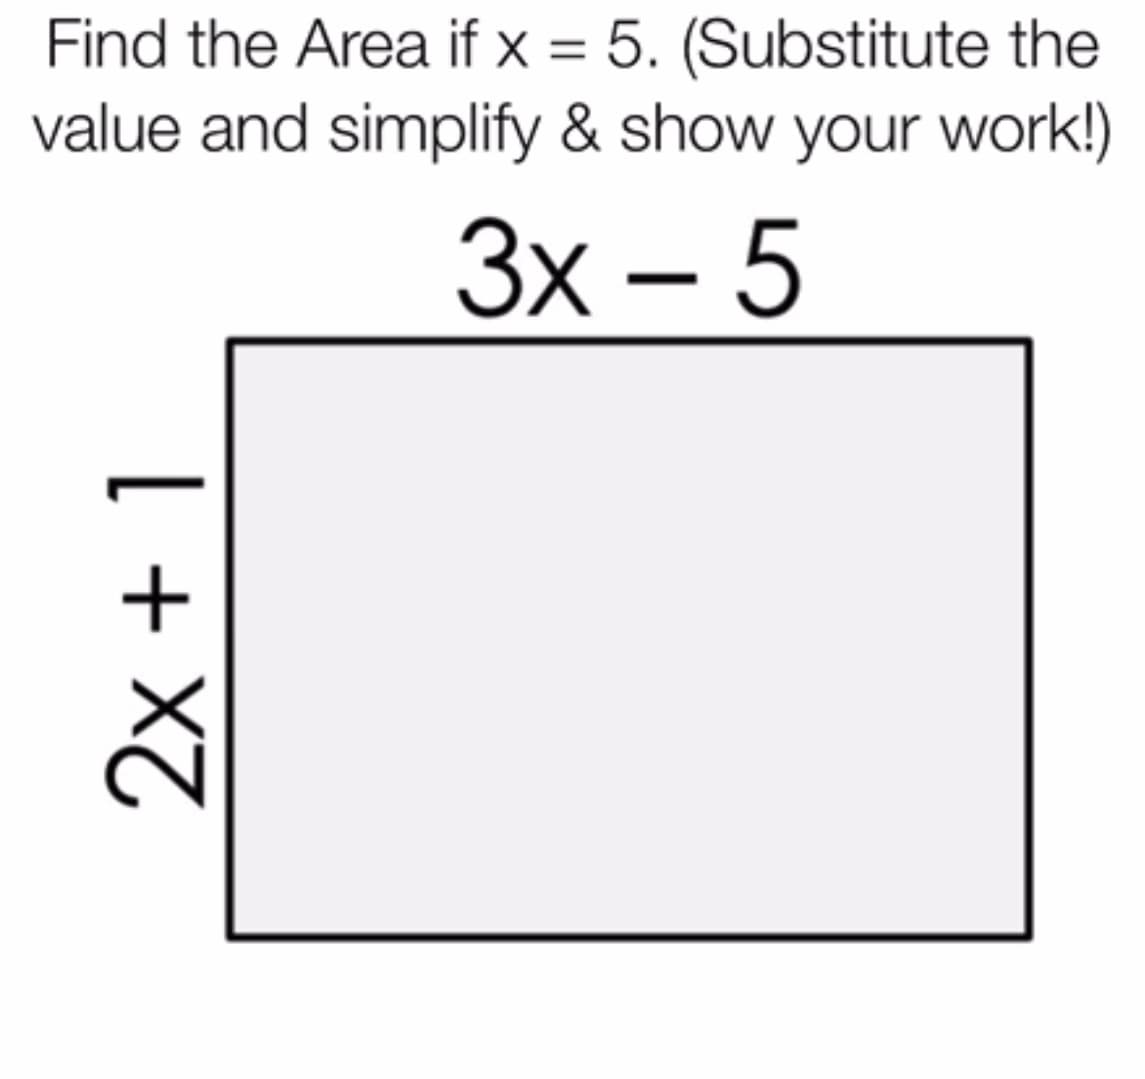 Find the Area if x = 5. (Substitute the
value and simplify & show your work!)
Зх - 5
2x + 1
